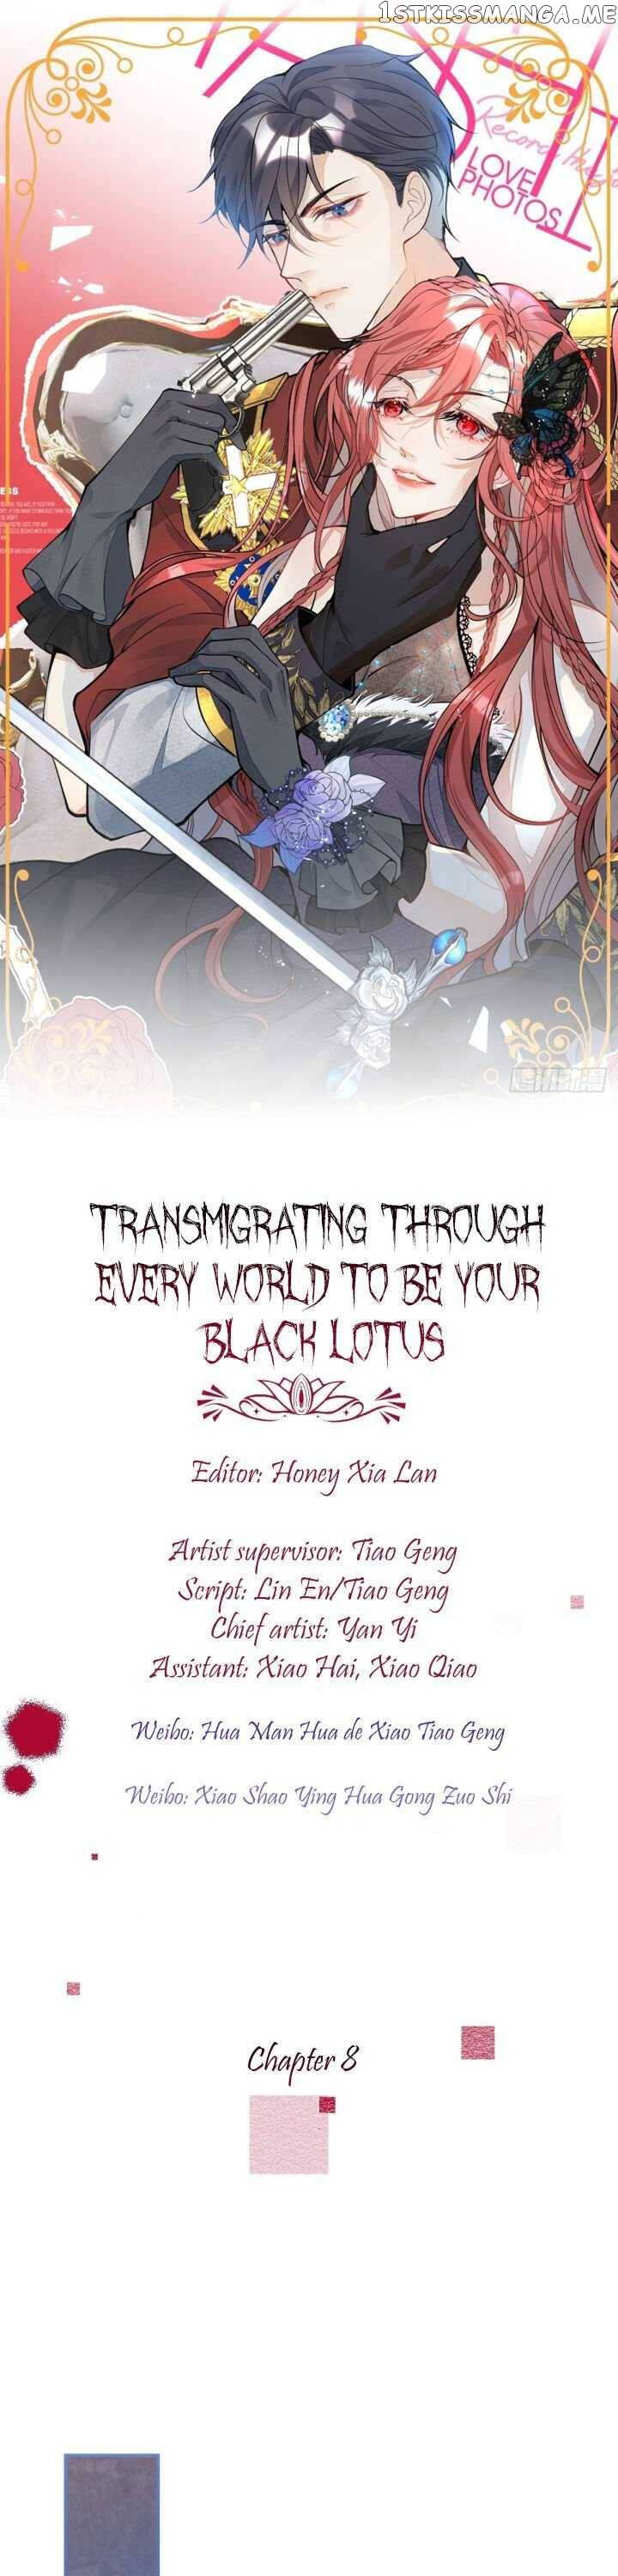 Transmigrating Through Every World To Be Your Black Lotus chapter 8 - page 1